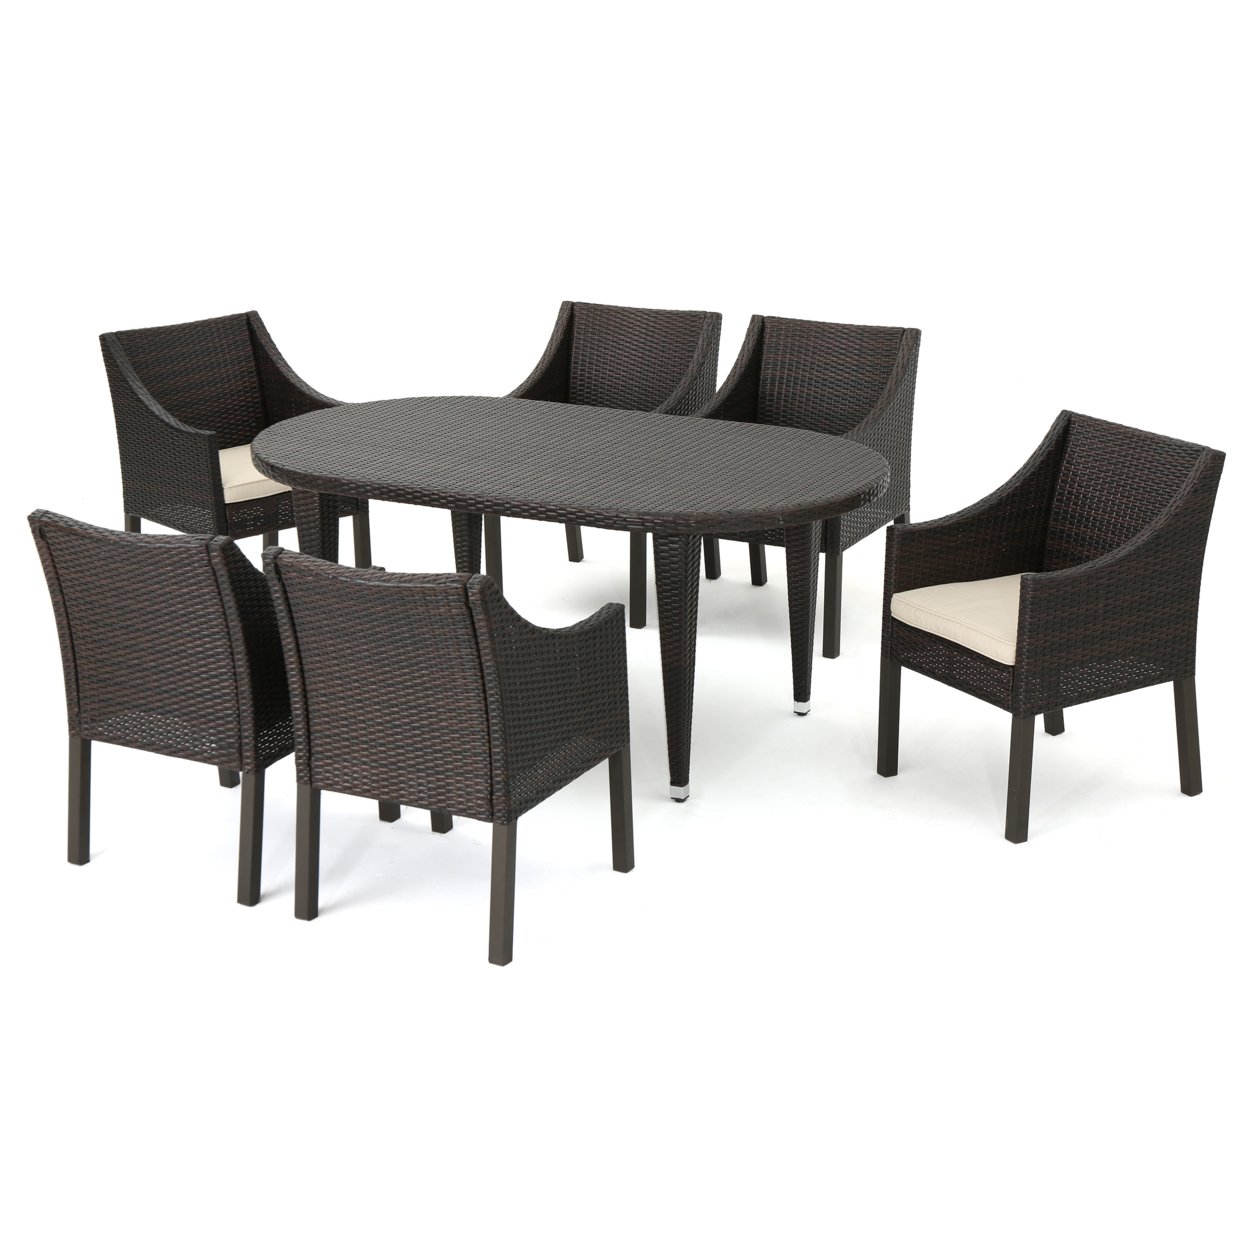 Nicholas Outdoor 7 Piece Wicker Oval Dining Set With Water Resistant Cushions - Multi-brown/Beige